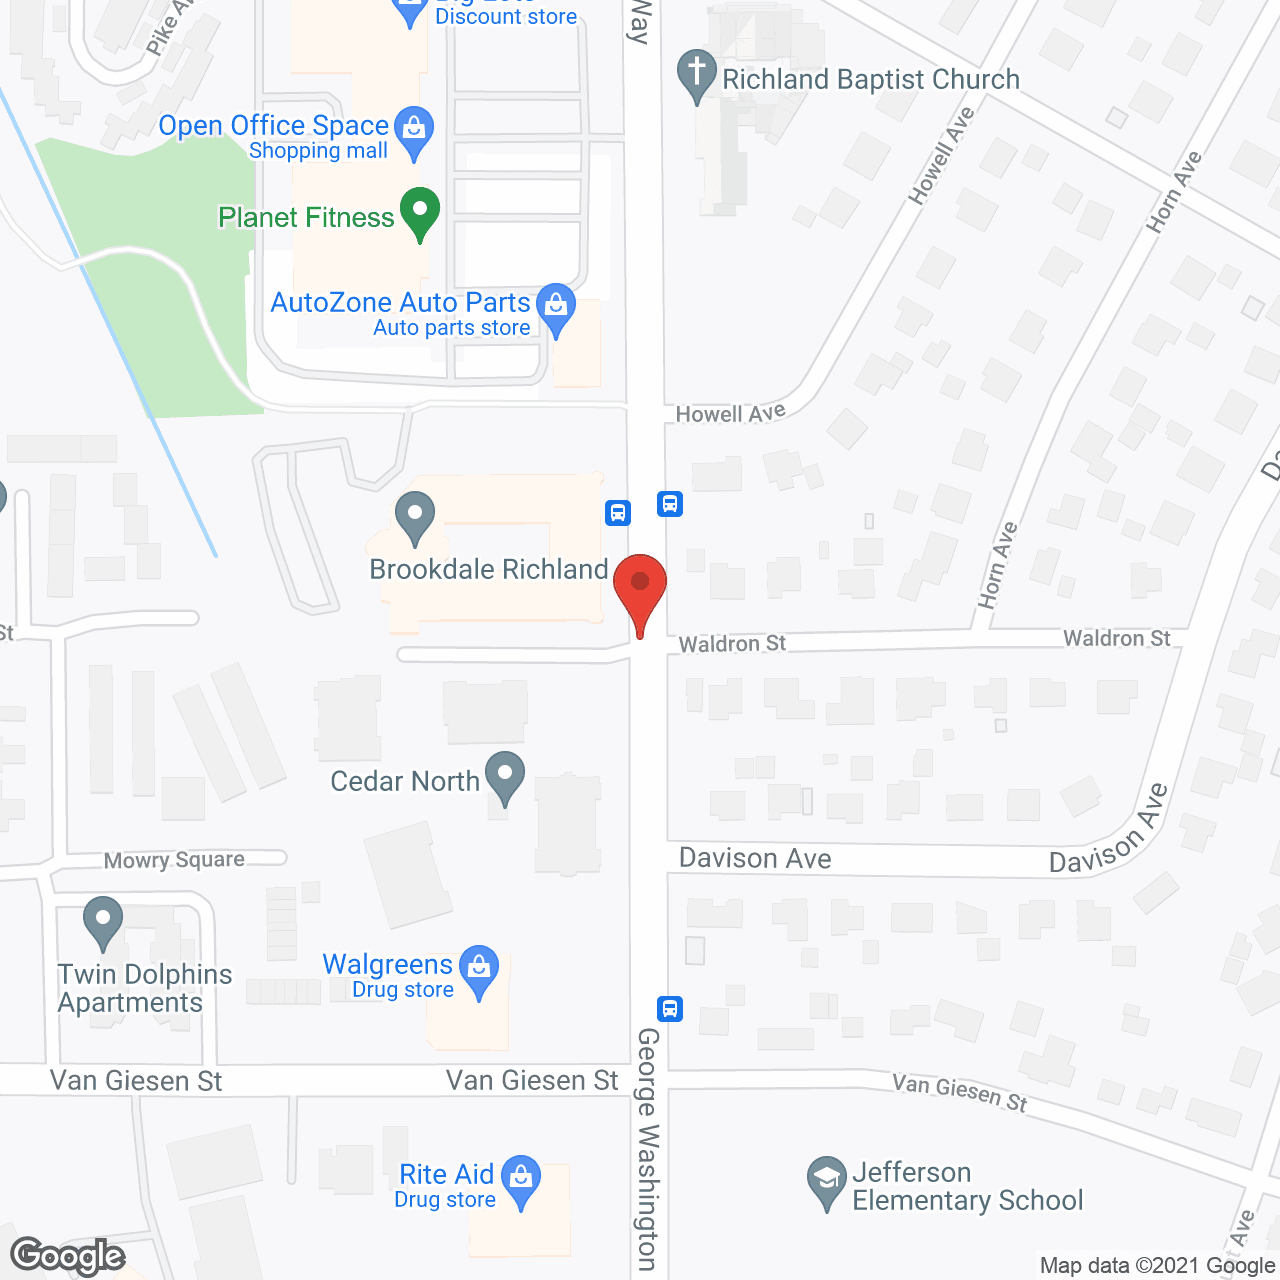 Brookdale Richland in google map